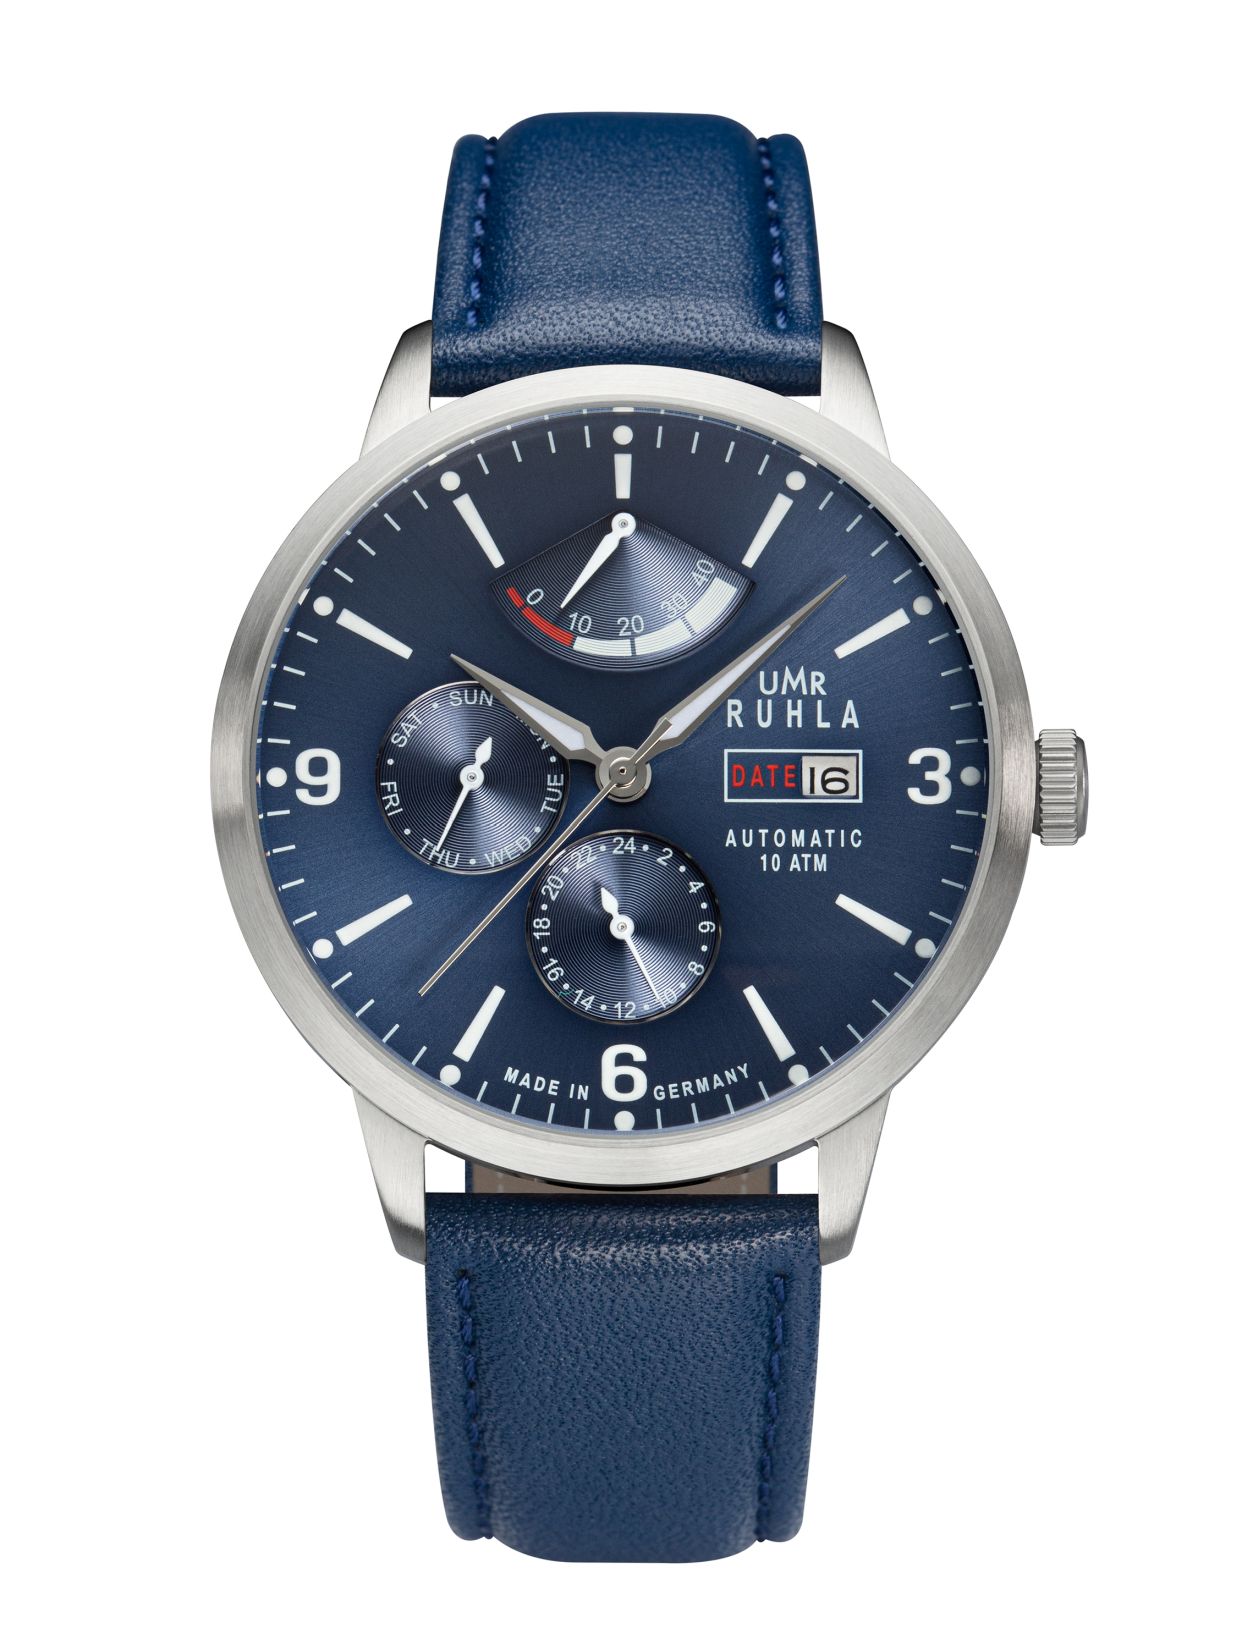 Uhren Manufaktur Ruhla - automatic watch with power reserve - blue - made in Germany